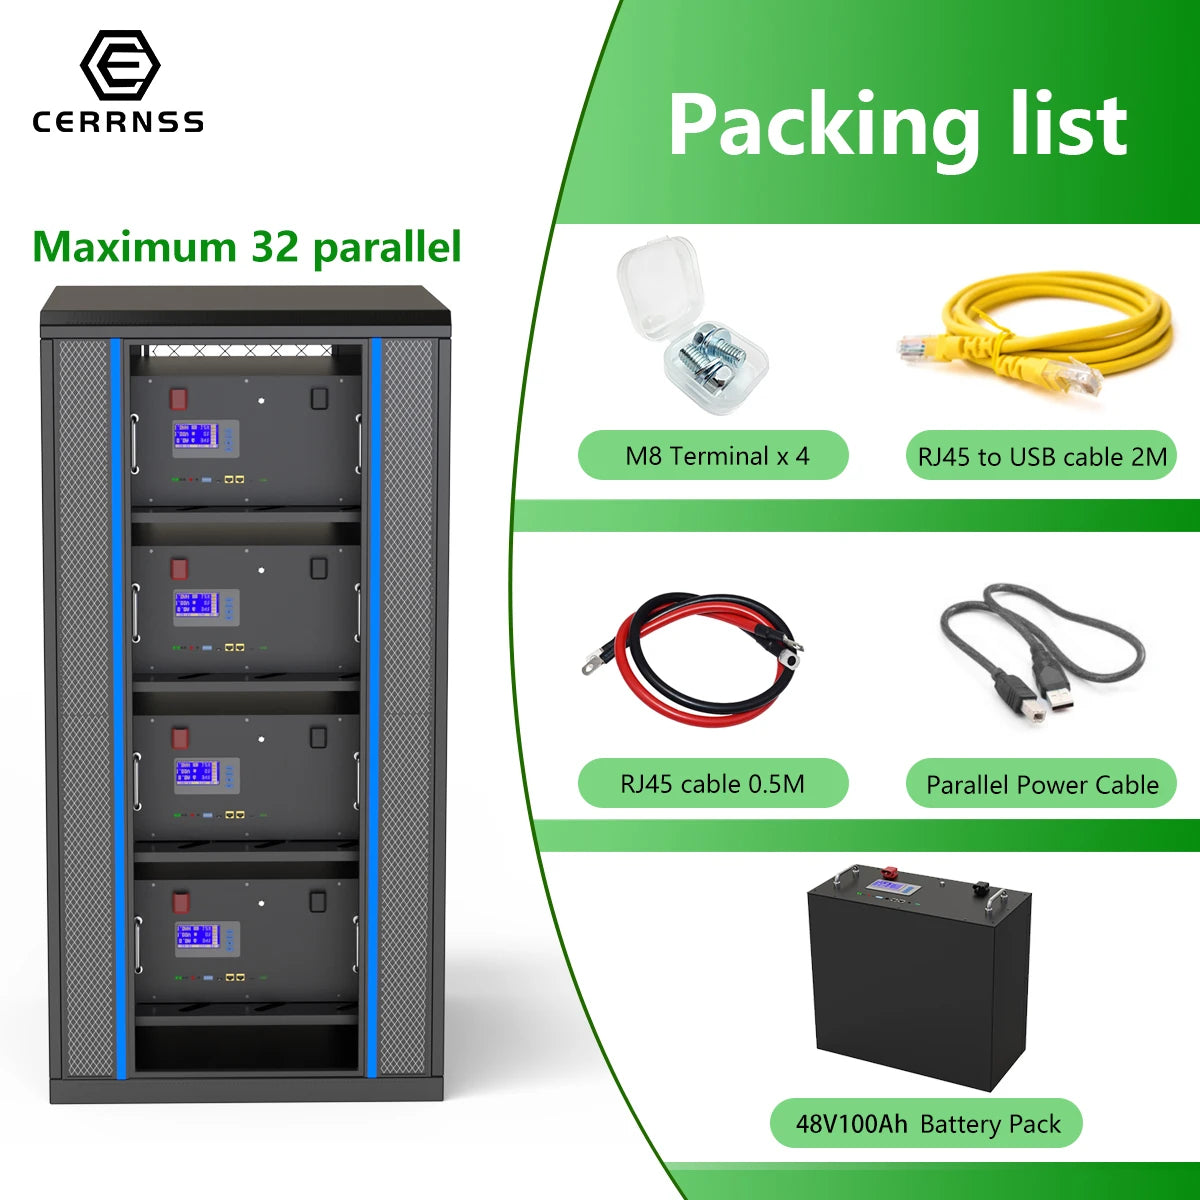 Industrial packaging with cables, terminals, and battery packs for efficient equipment connection.